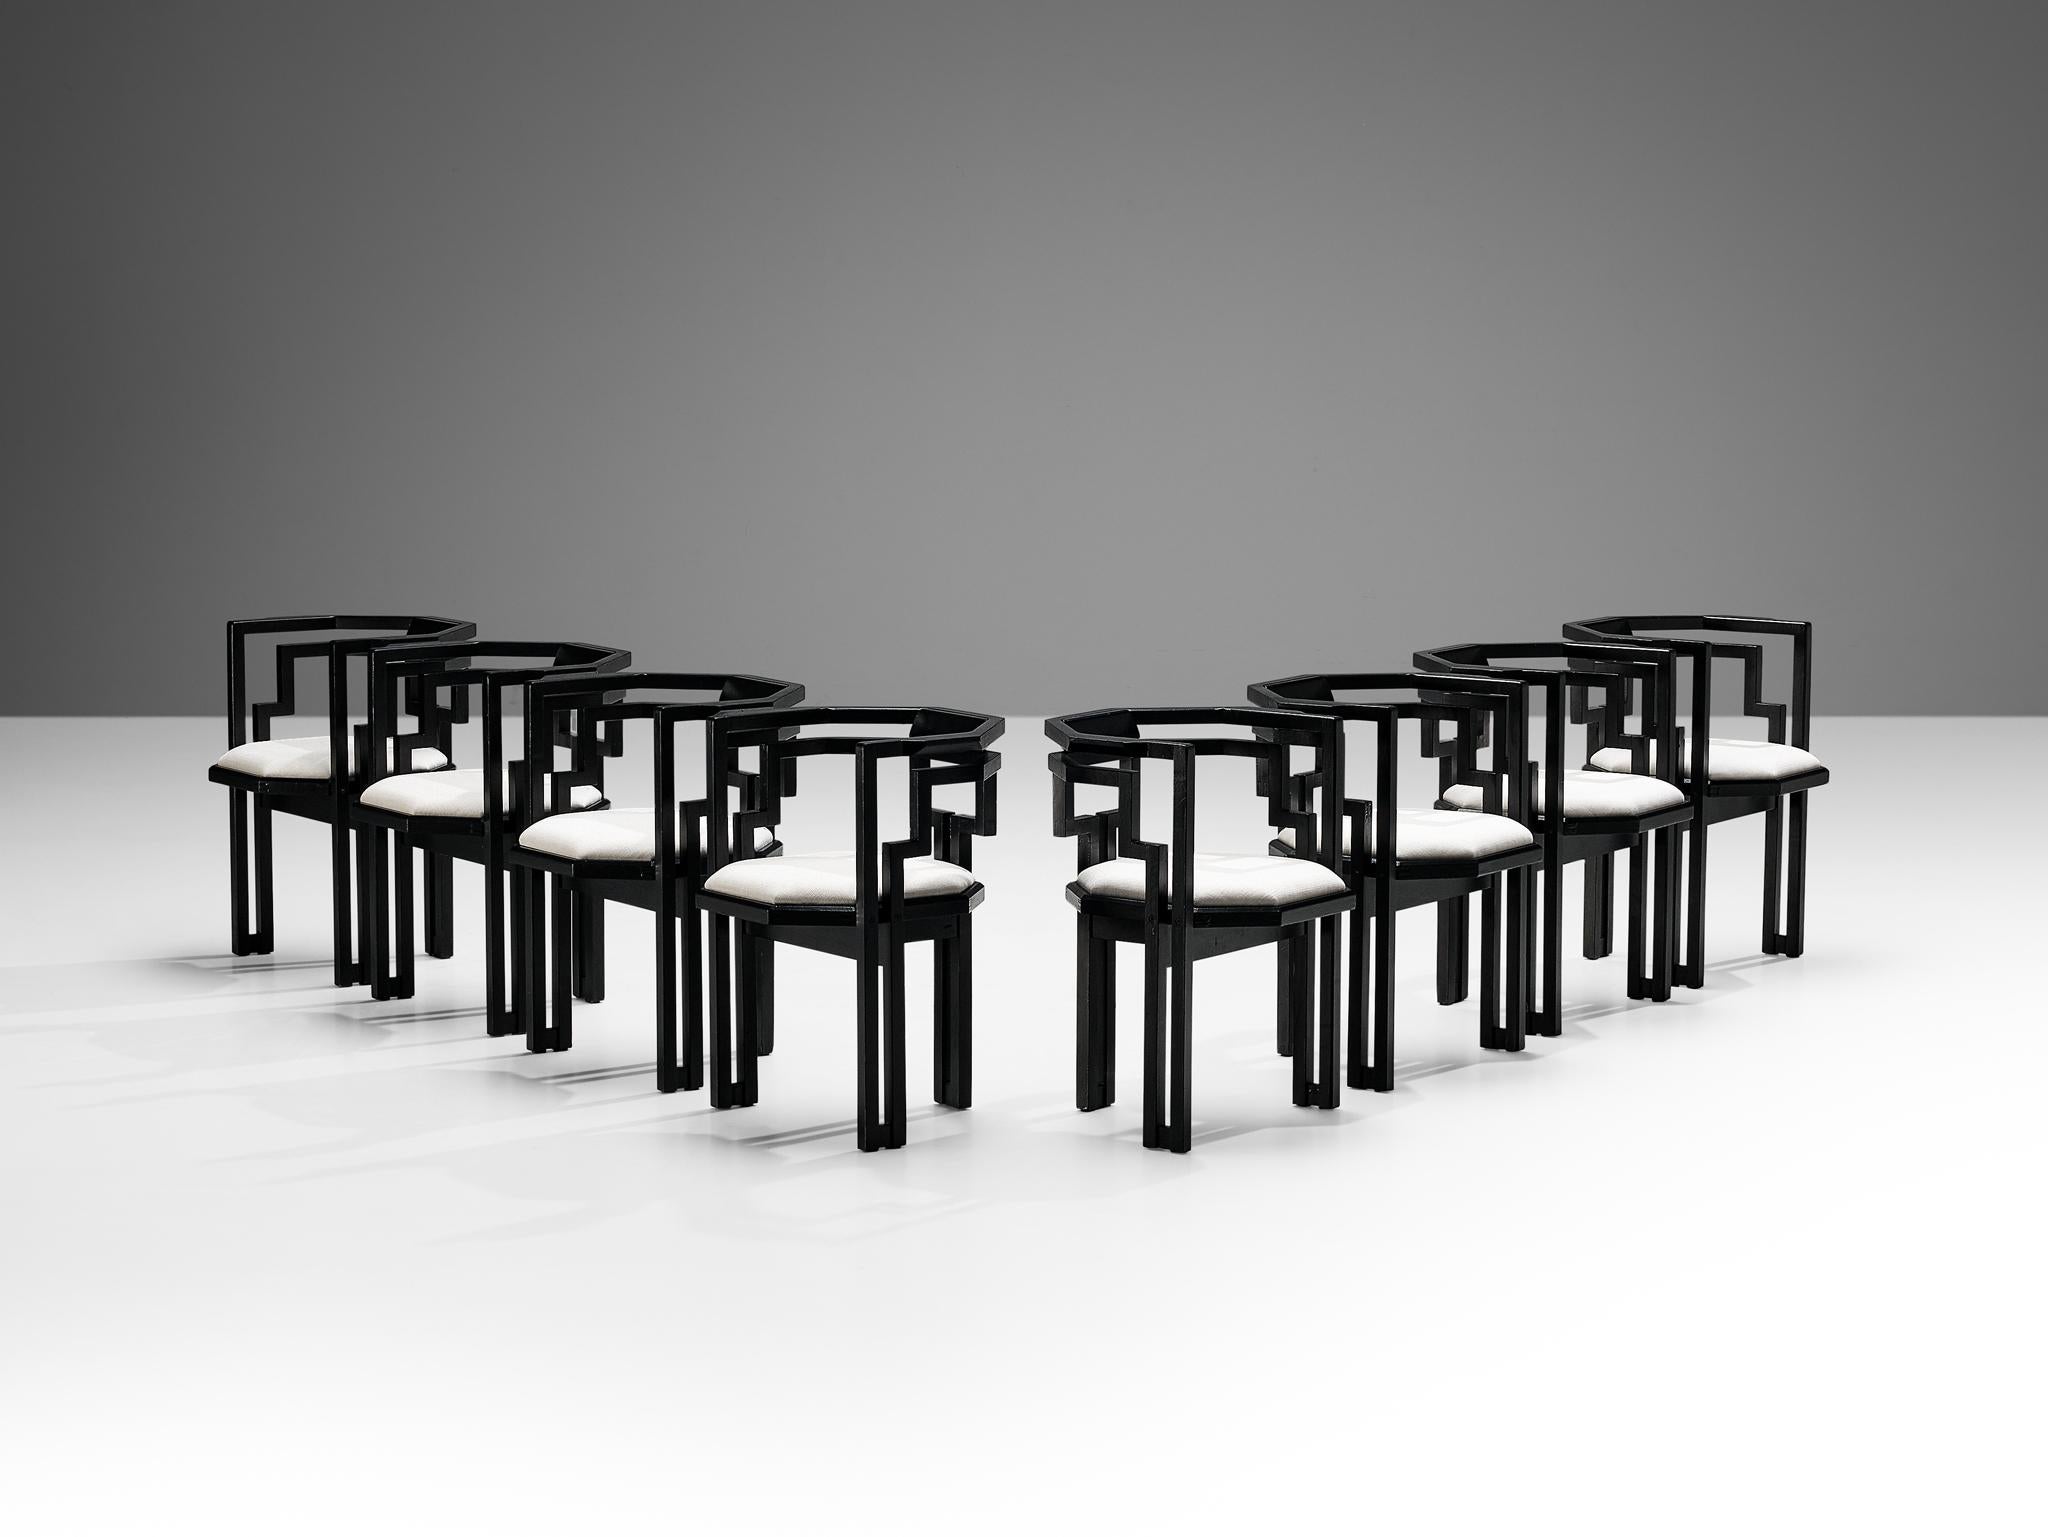 Set of eight dining chairs, black lacquered oak, white fabric, Italy, 1970s.

Outstanding set of eight geometric Italian dining chairs. These chairs combine a sculptural design that is simple, but very strong in lines and proportions with a